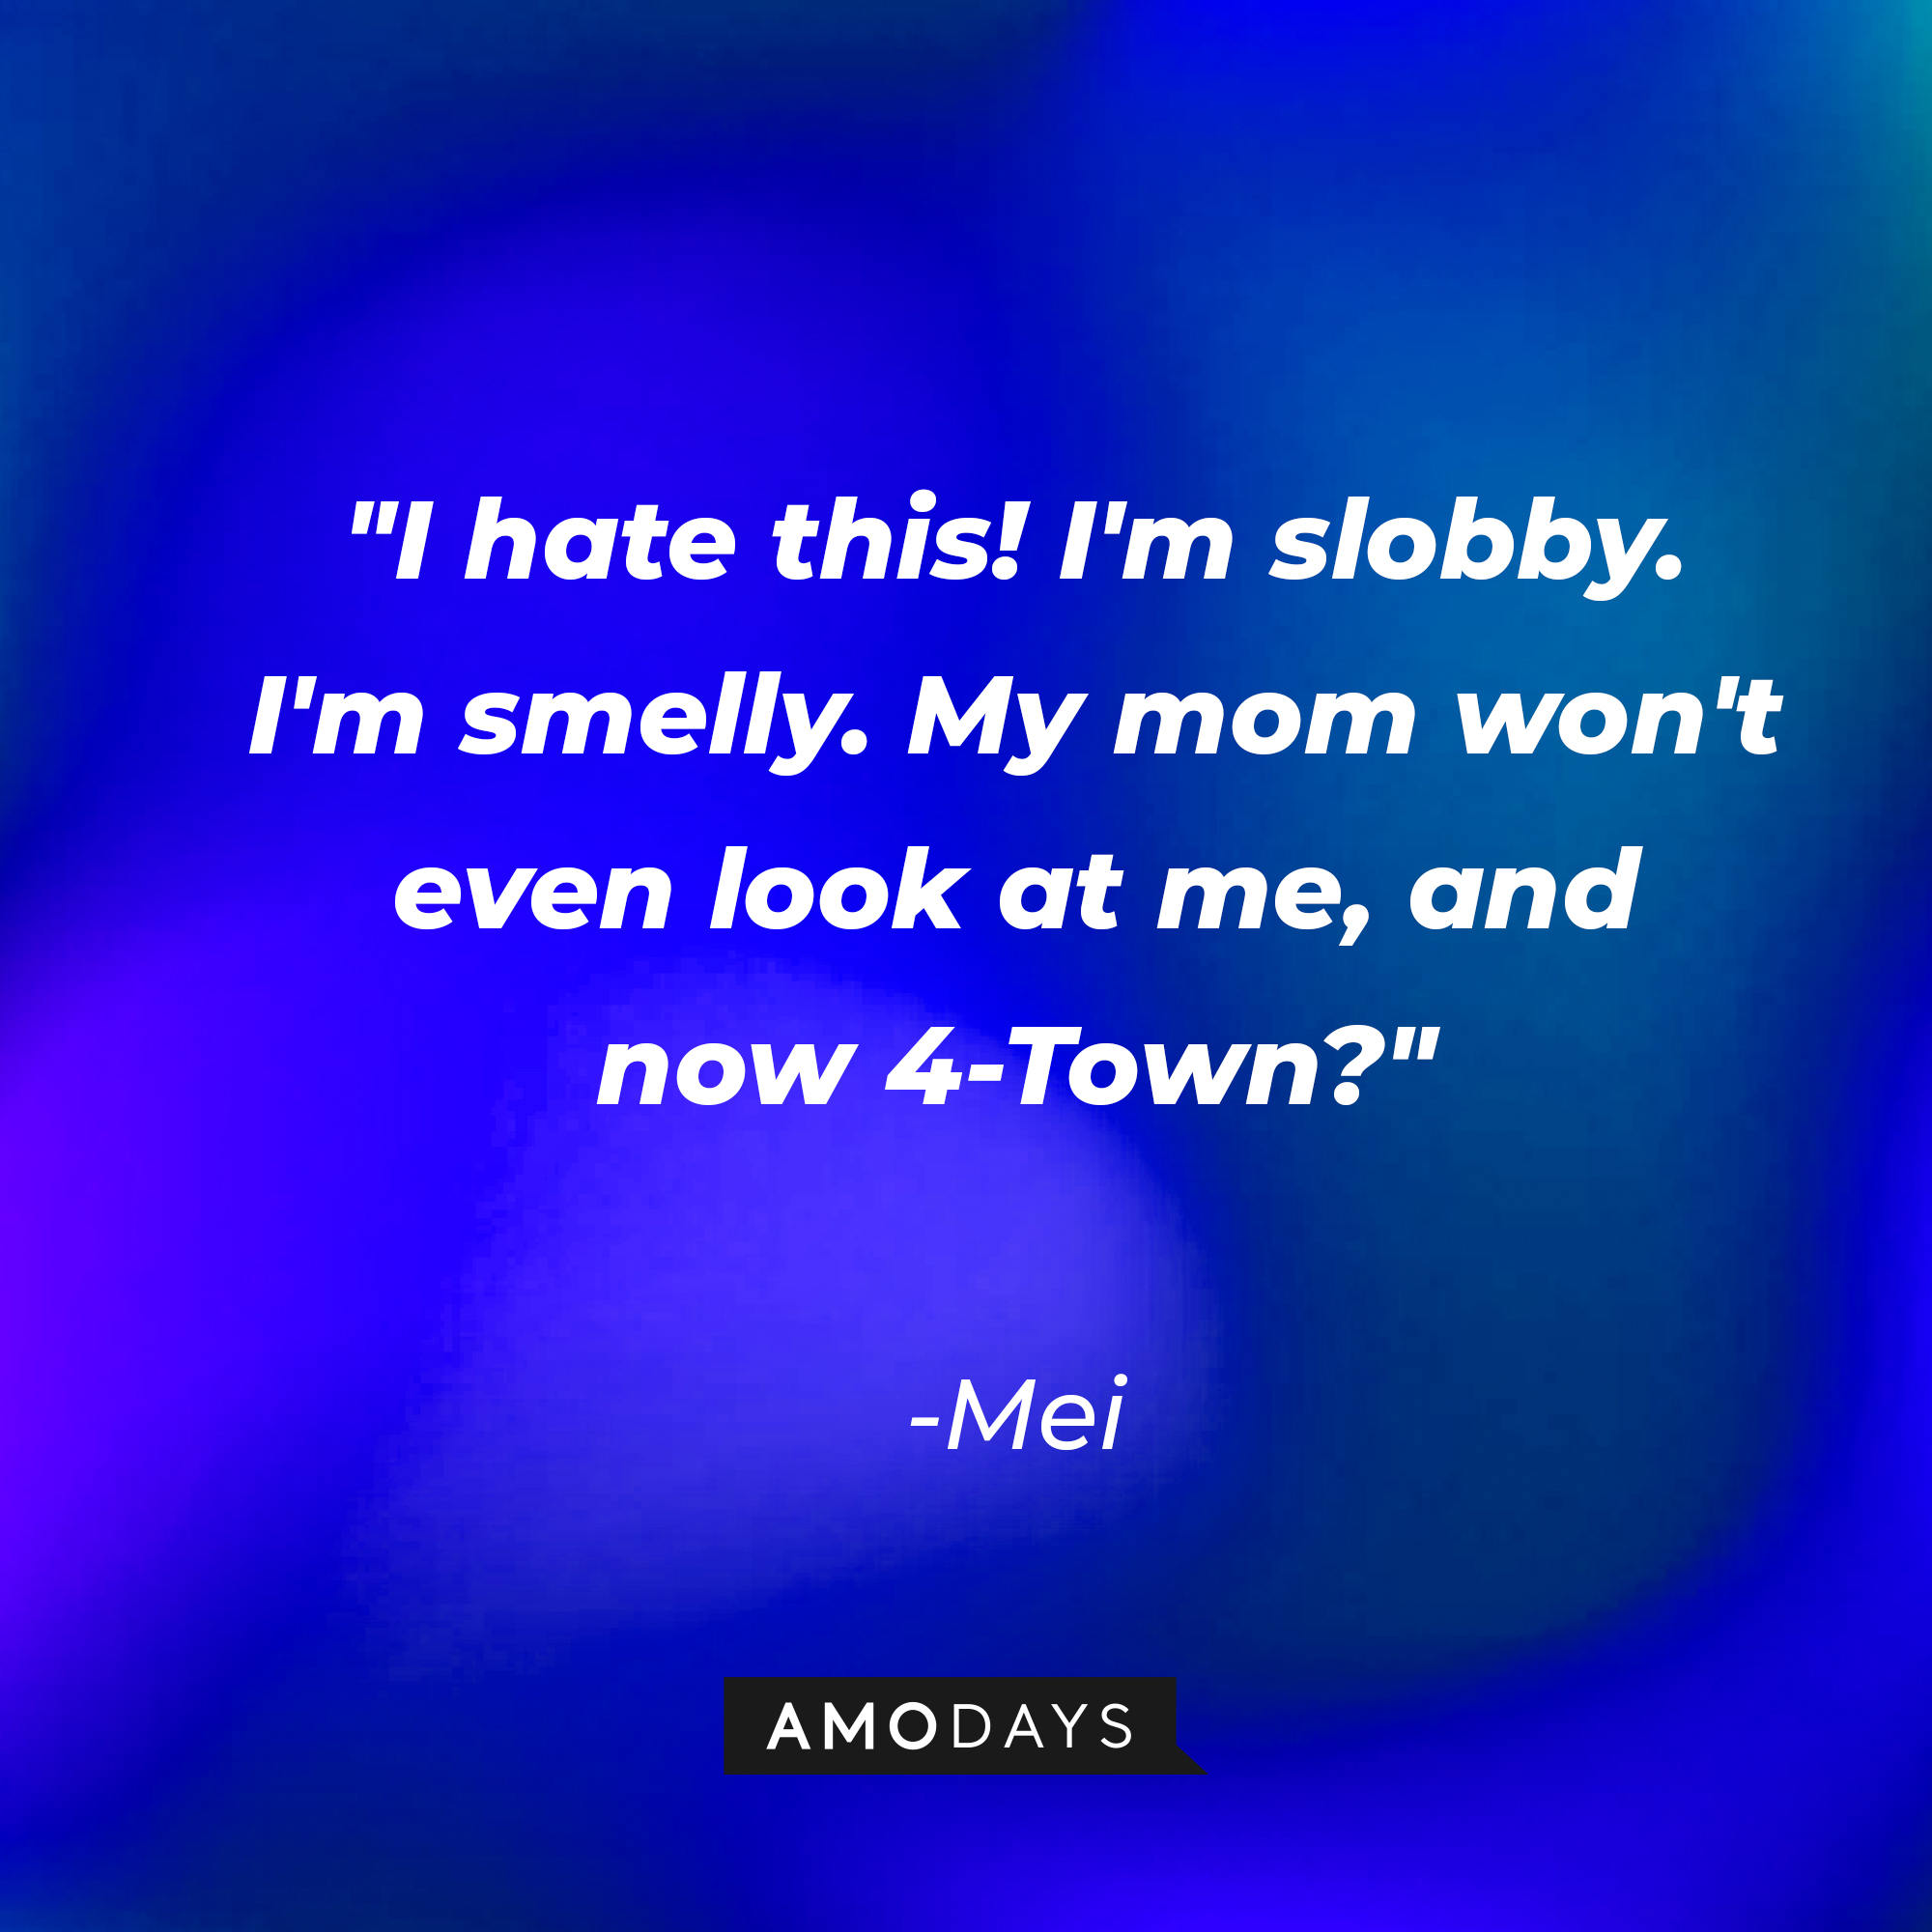 Mei's quote: "I hate this! I'm slobby. I'm smelly. My mom won't even look at me, and now 4-Town?" | Source: AmoDays